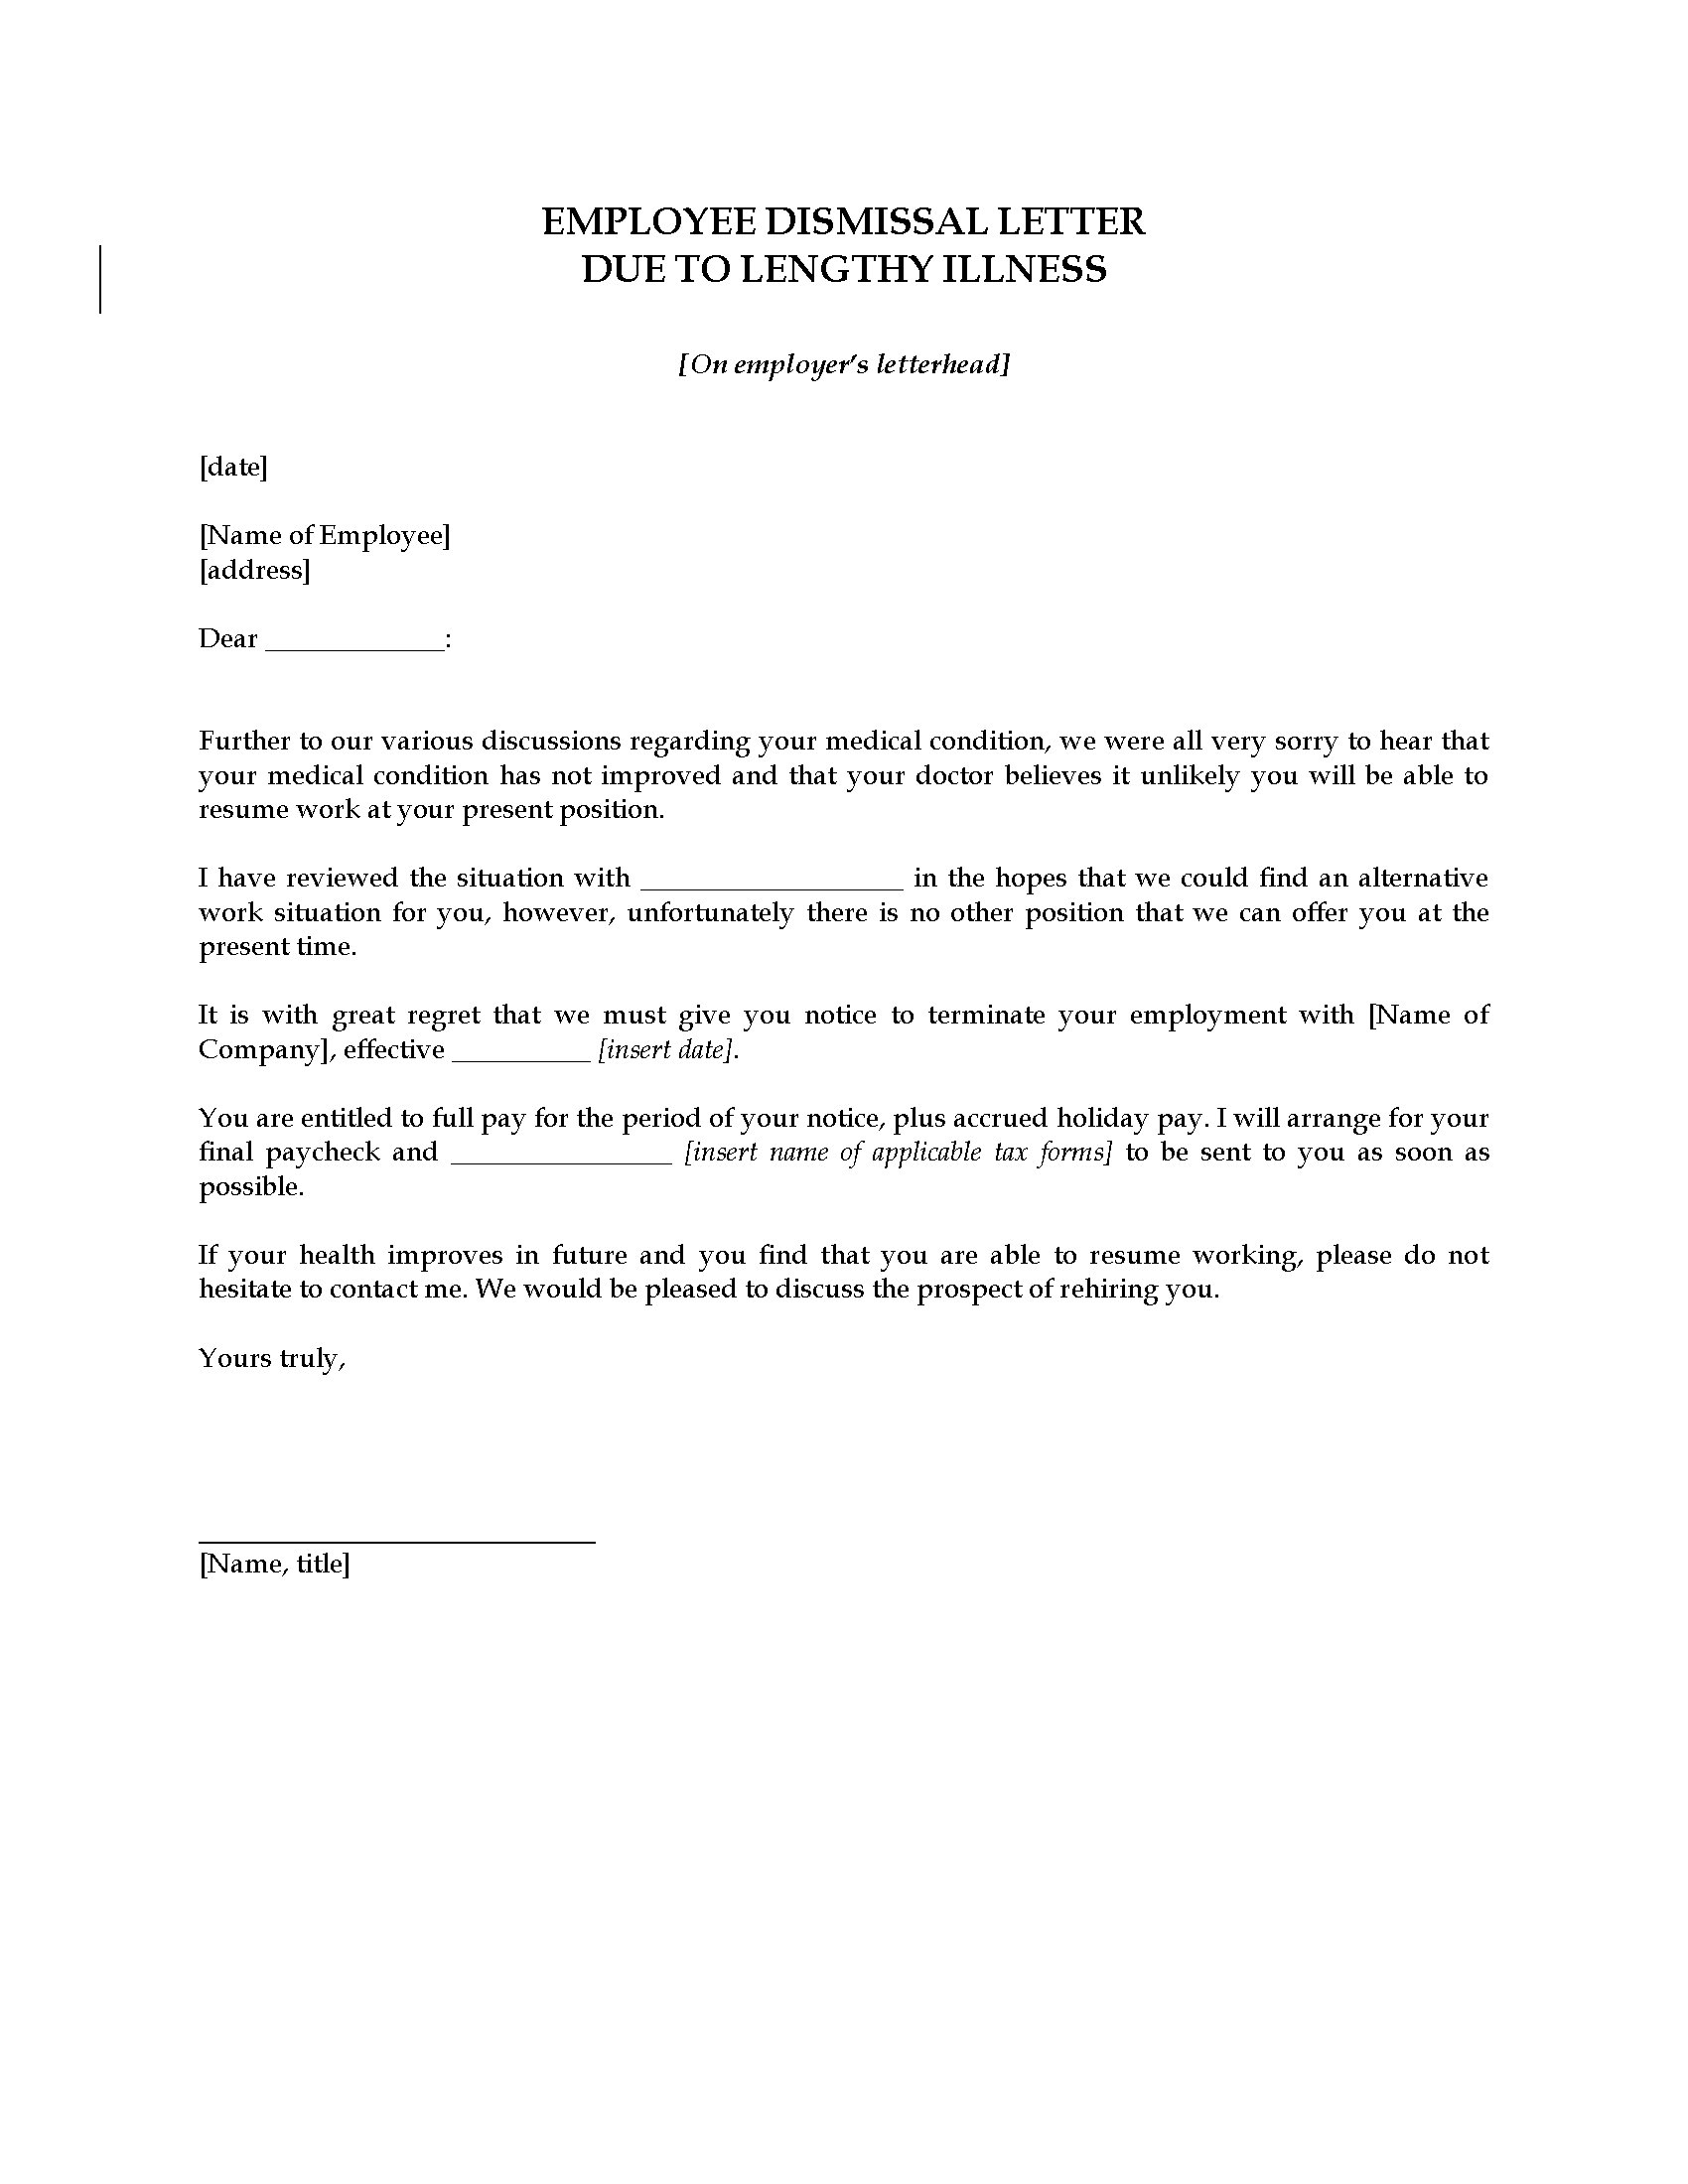 Employee Termination Letter Due to Lengthy Illness  Legal 